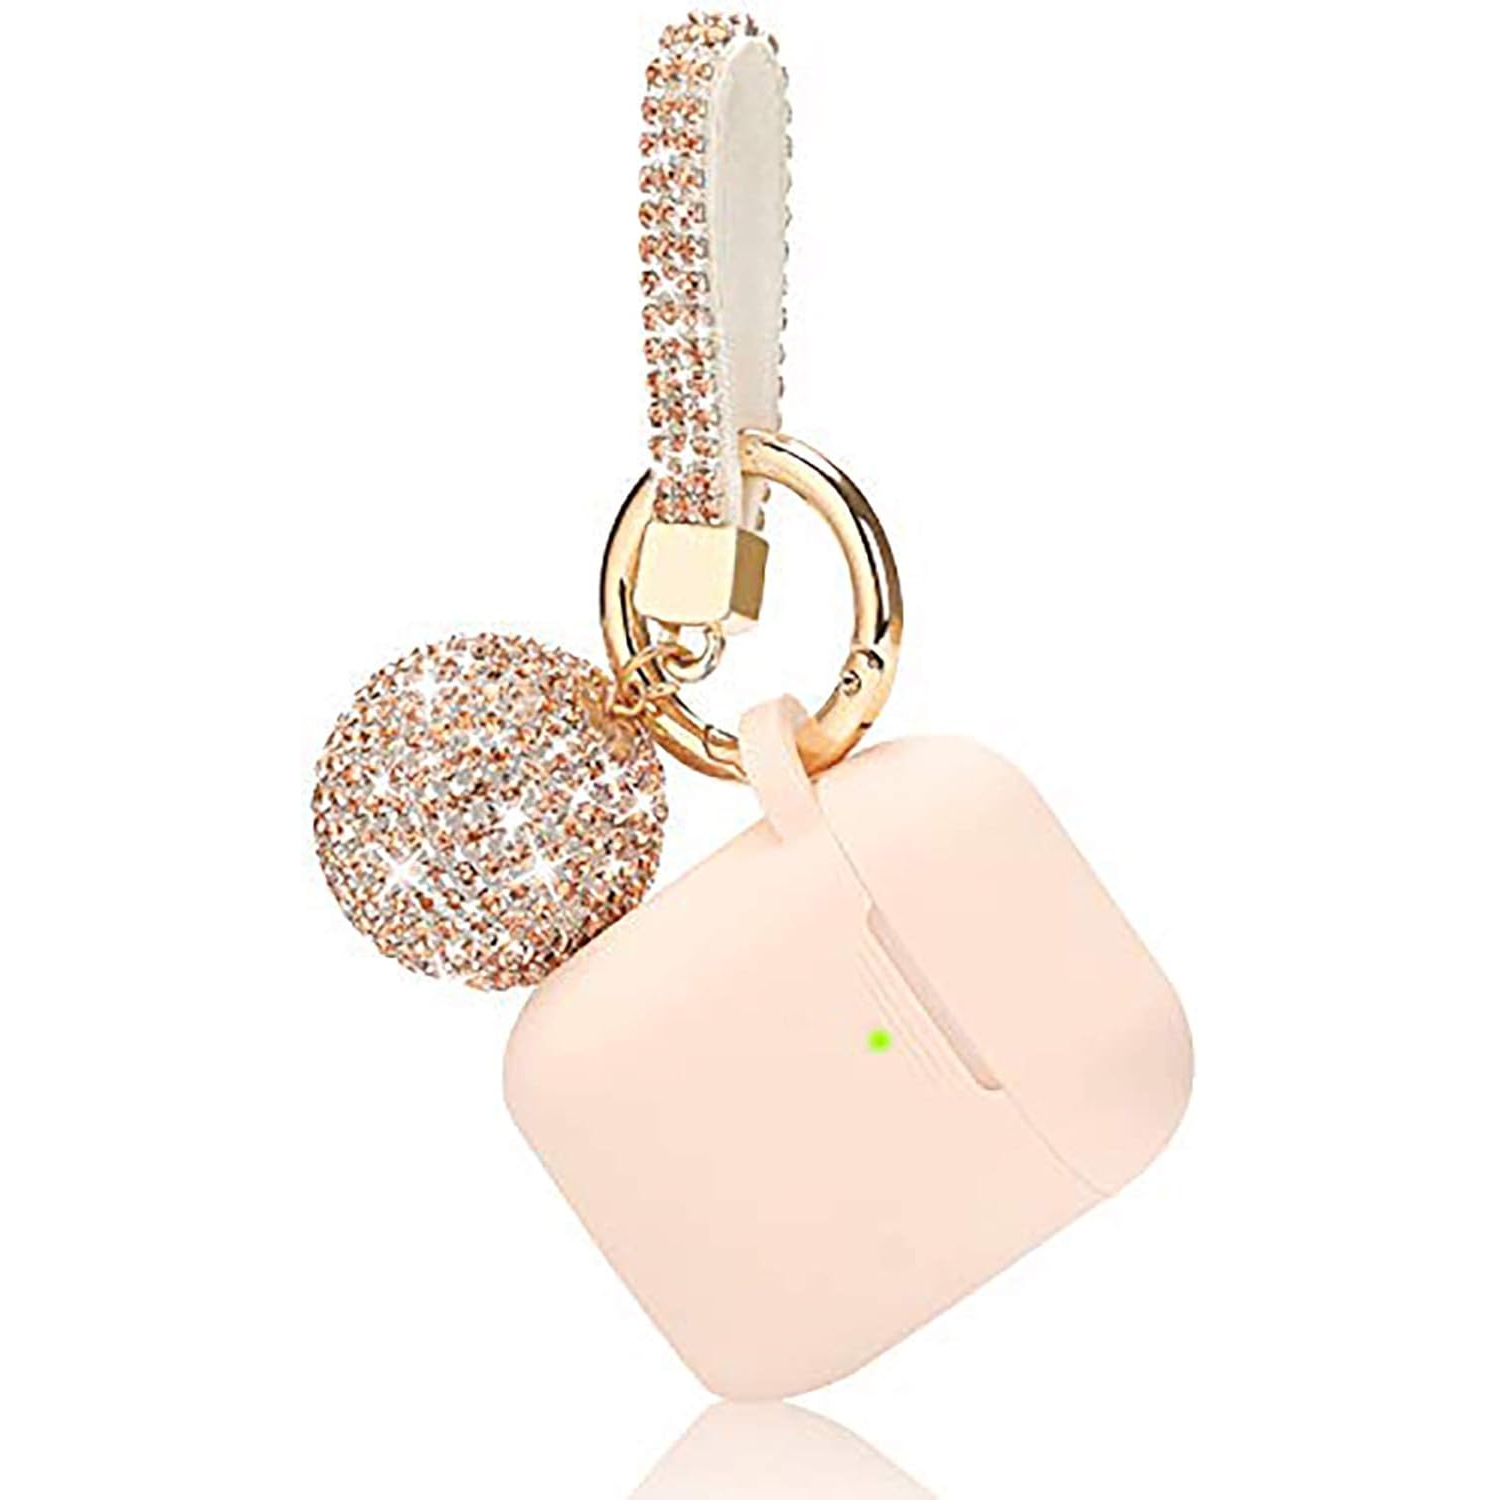 Case for Airpods, Bling Airpod Silicone Case Cover Skin, Air Pods Protective Glitter Case with Shiny Disco Ball